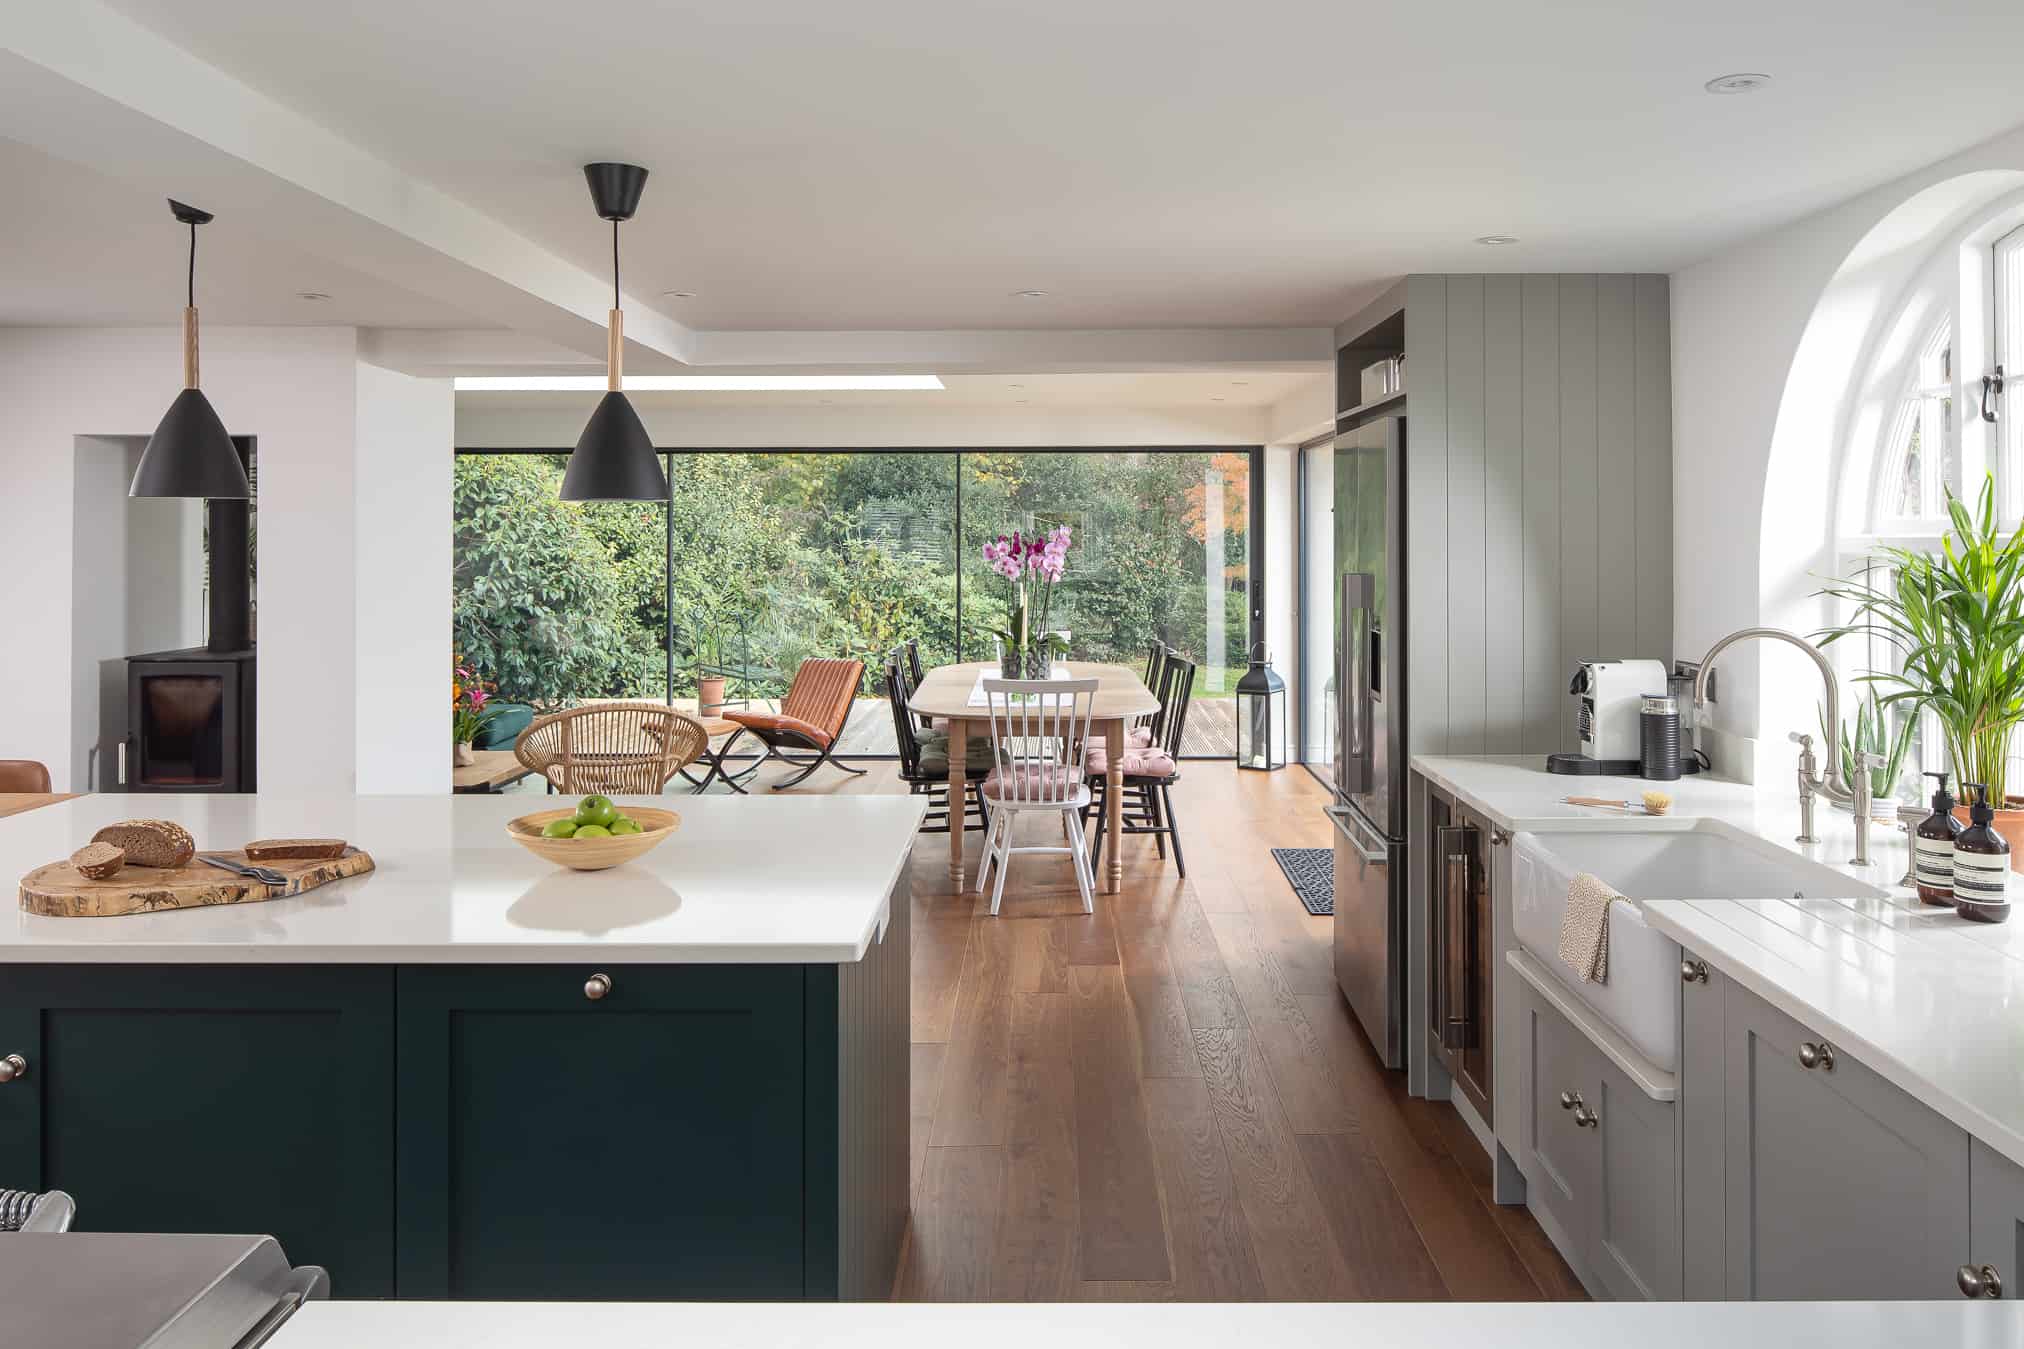 Designing A Luxury Kitchen Extension   John Lewis of Hungerford